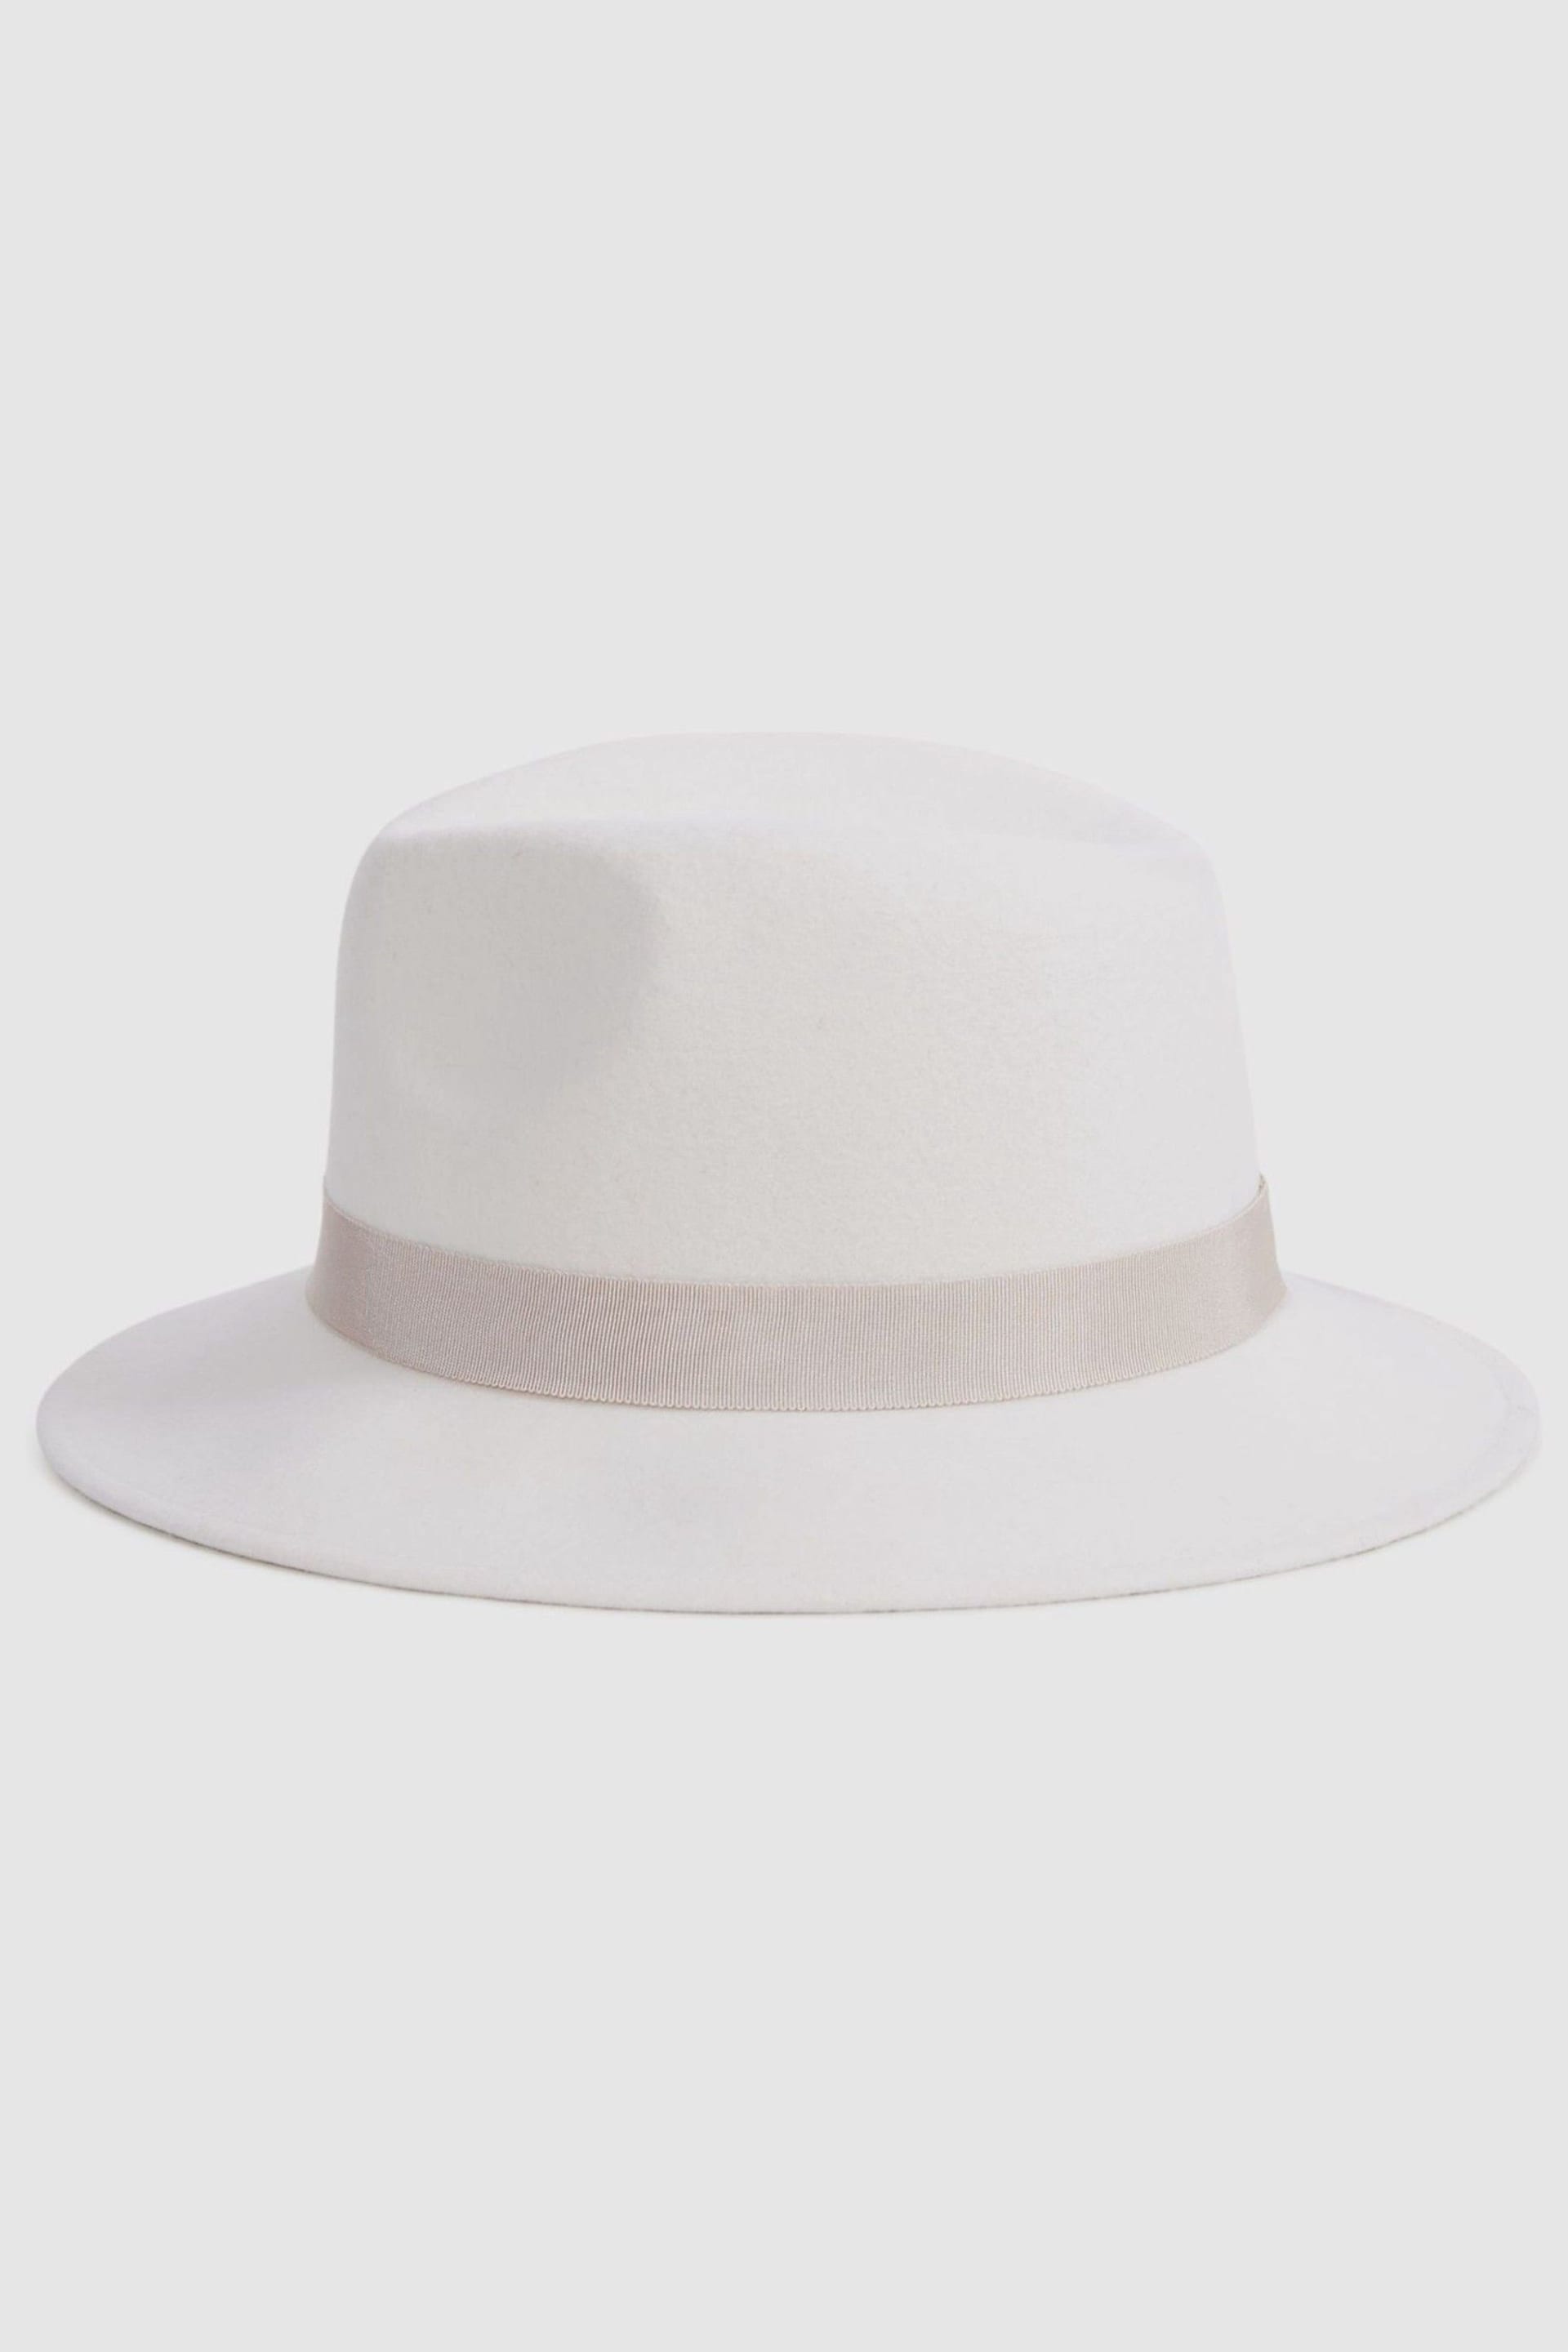 Reiss Ivory Ally Wool Fedora Hat - Image 1 of 4